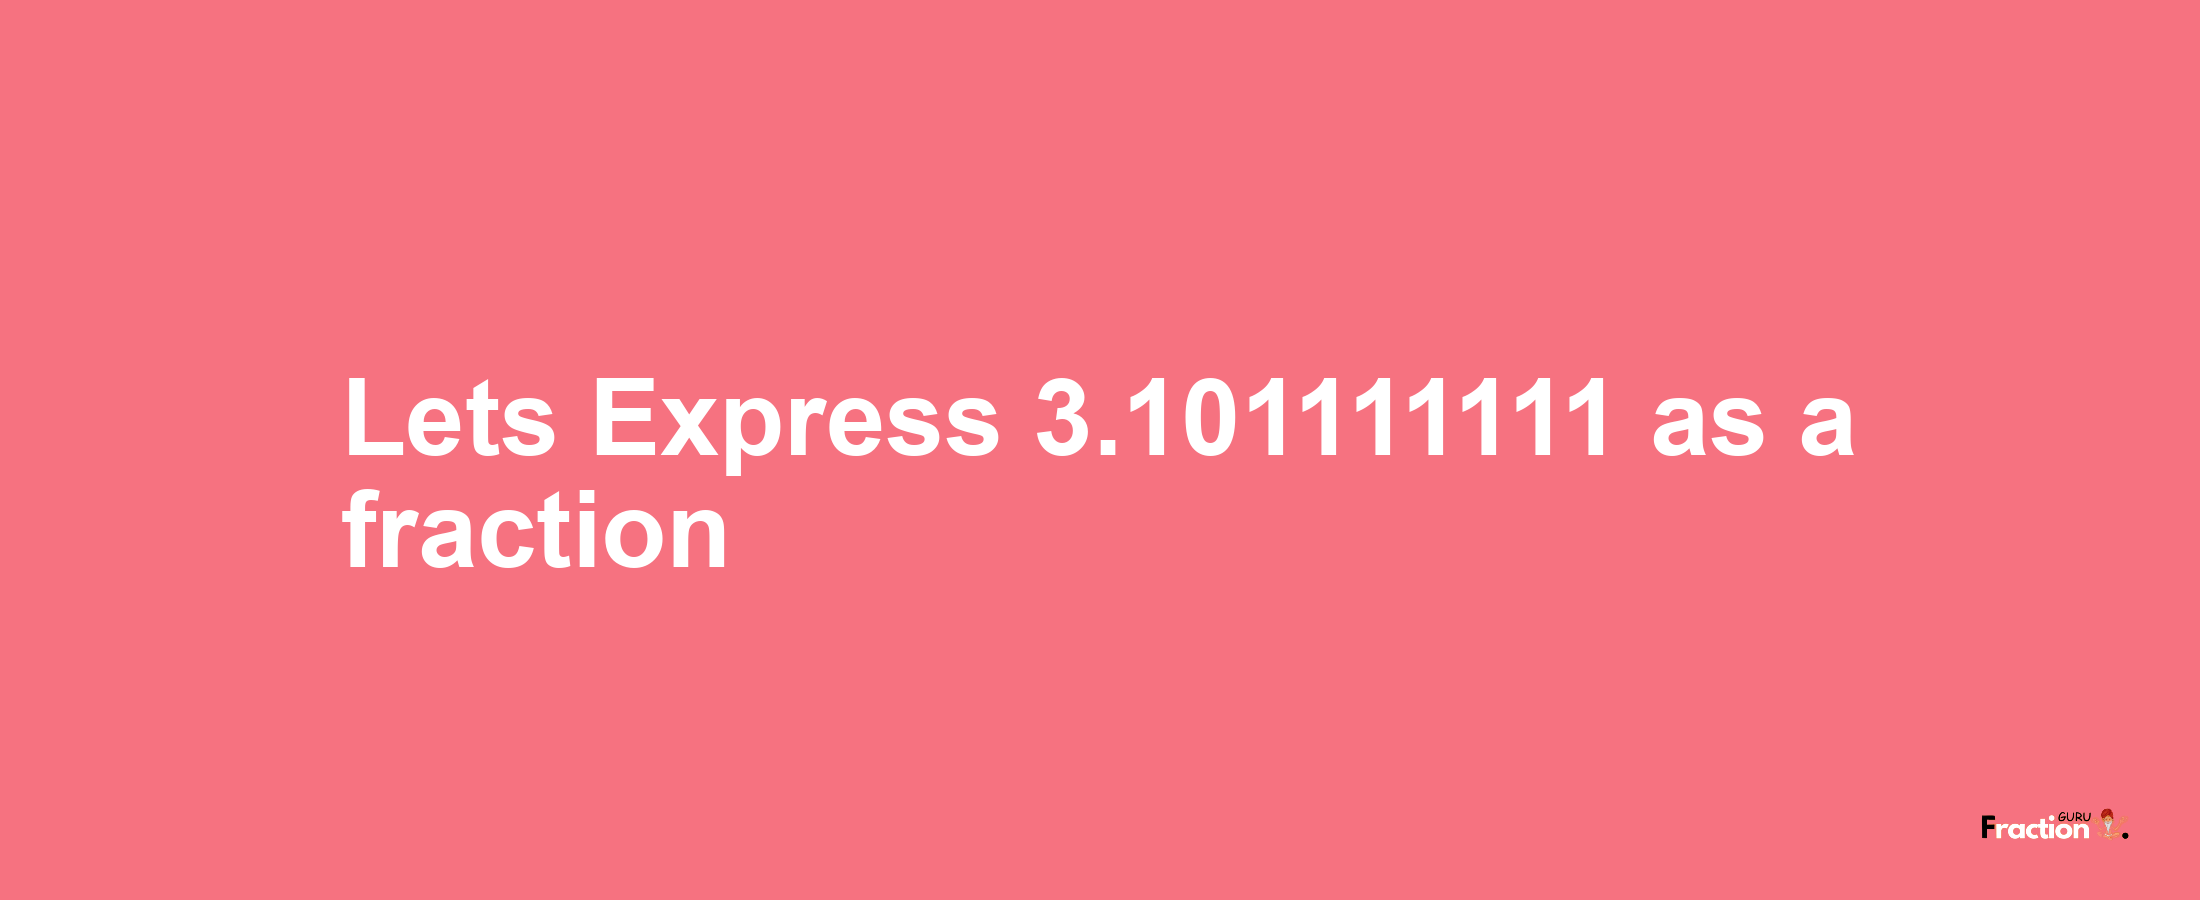 Lets Express 3.101111111 as afraction